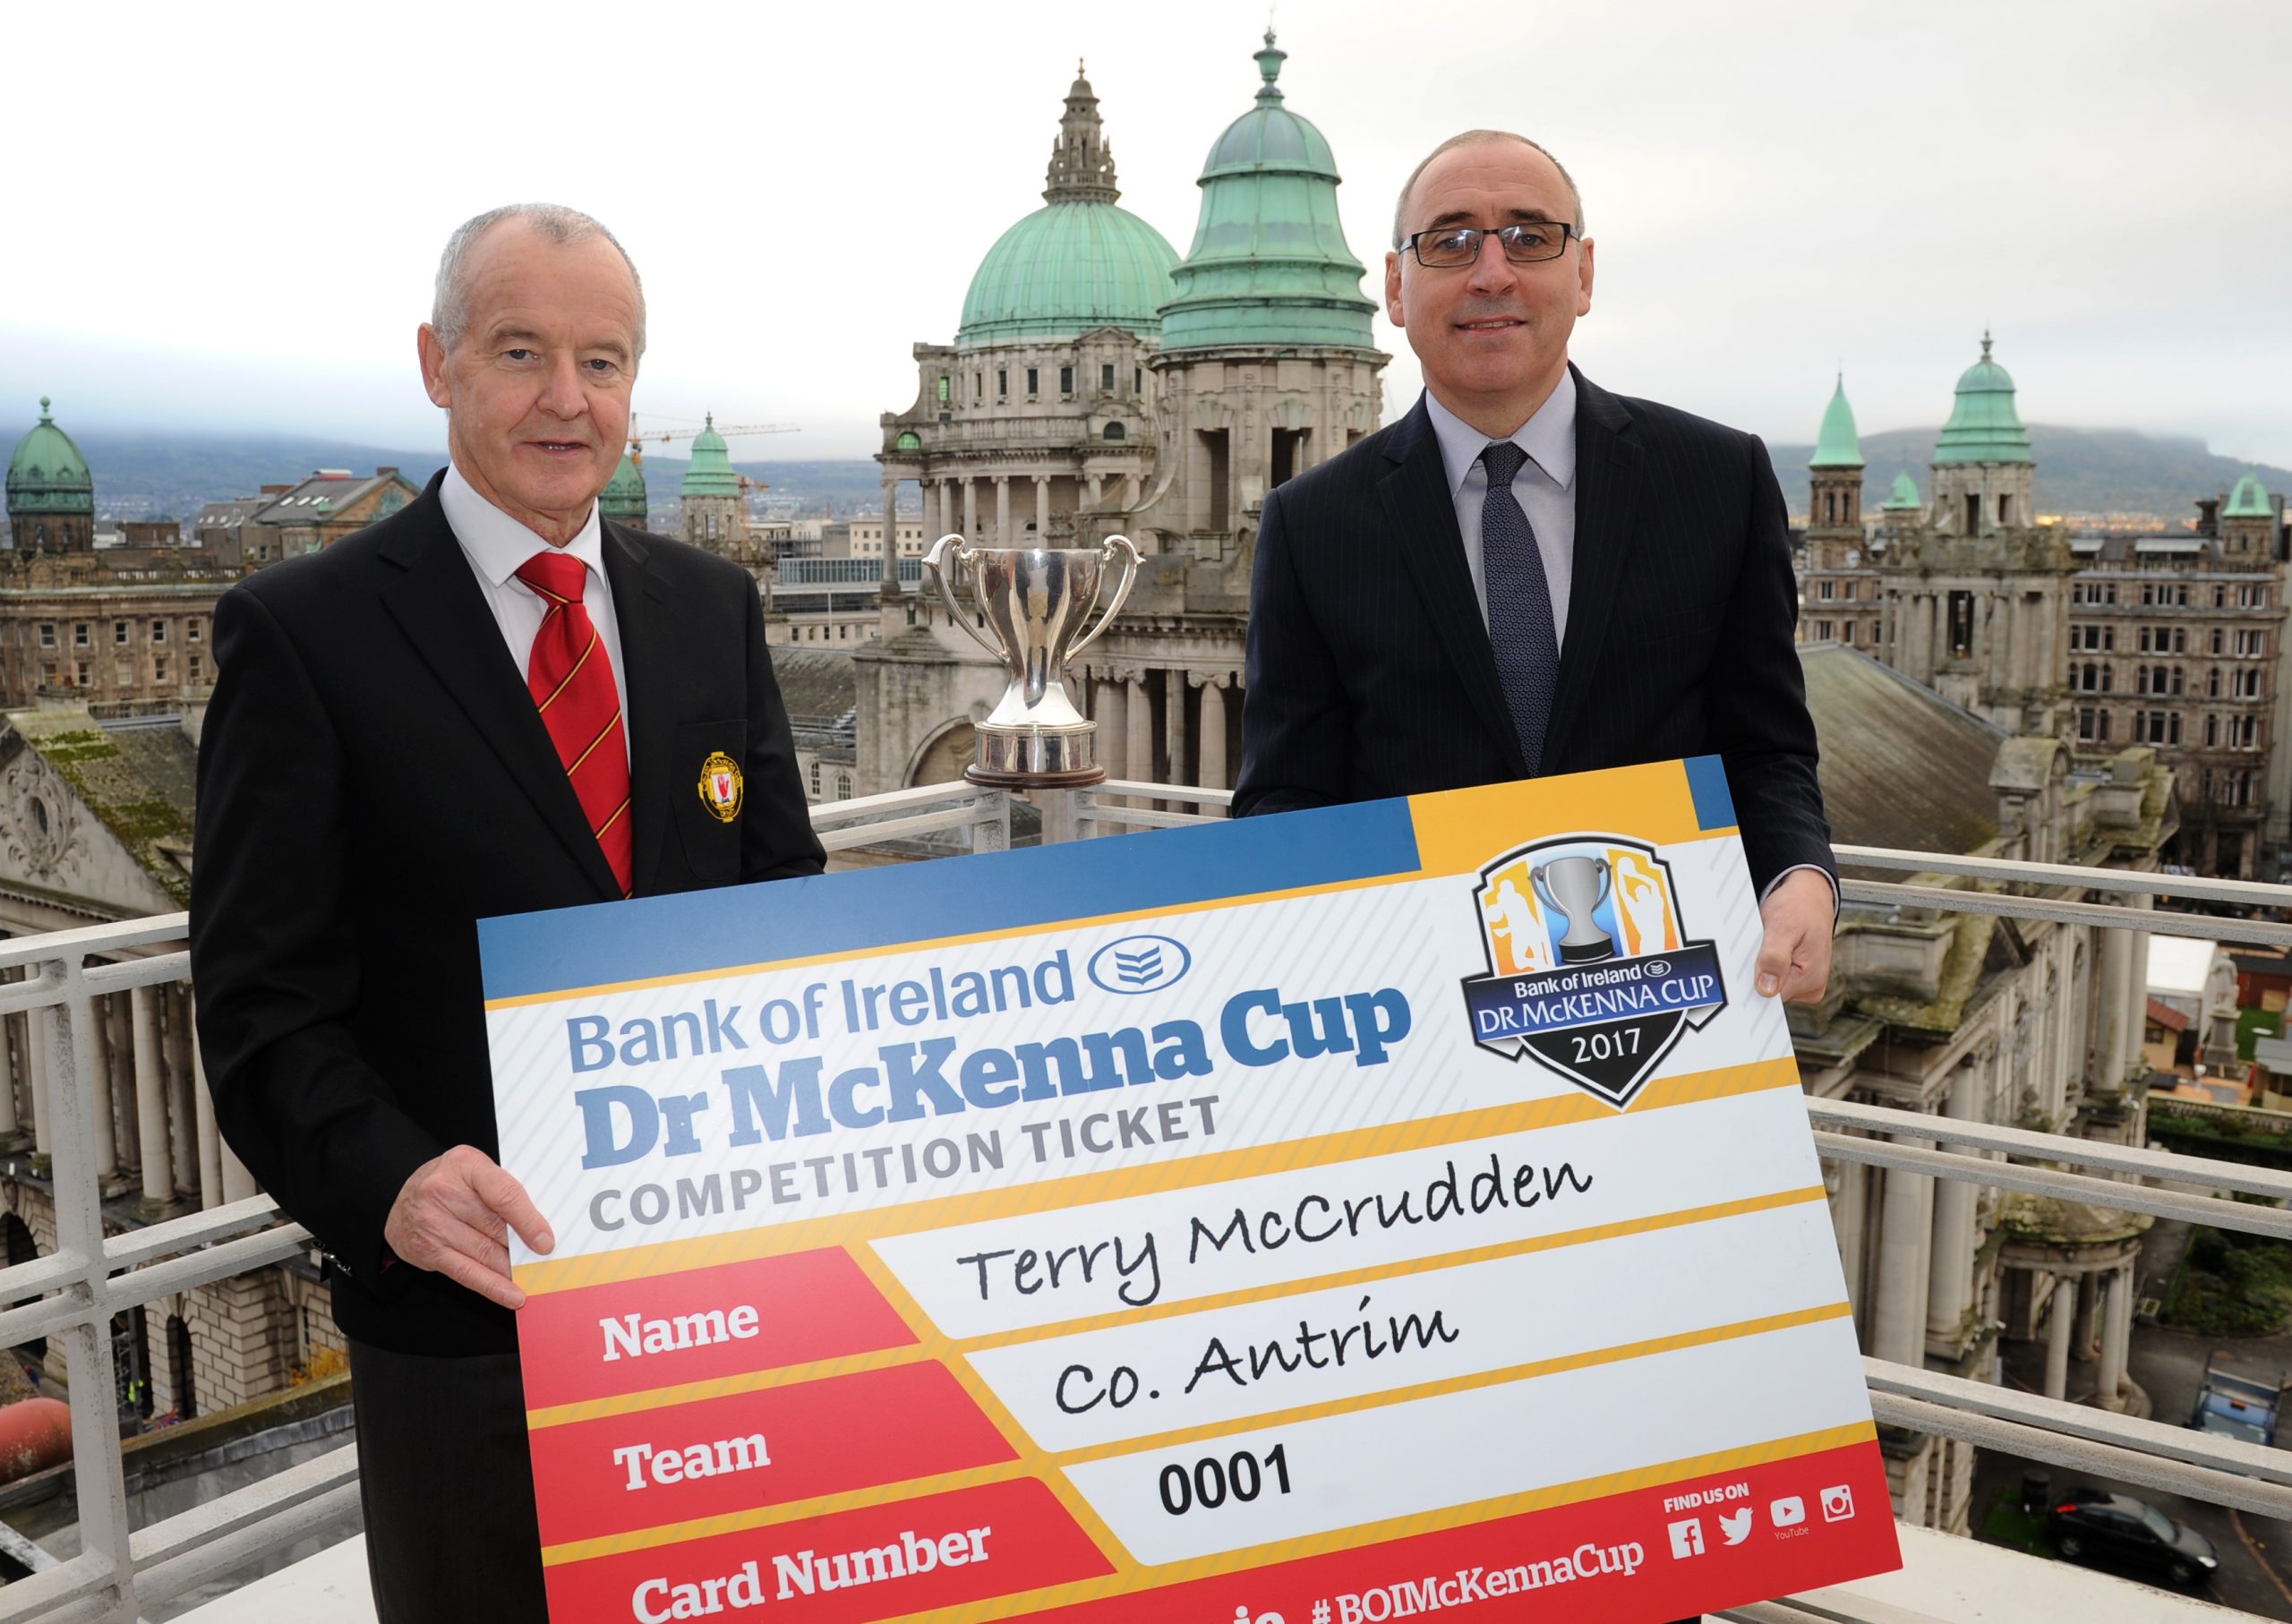 Launch of 2017 Bank of Ireland Dr McKenna Cup Competition Ticket